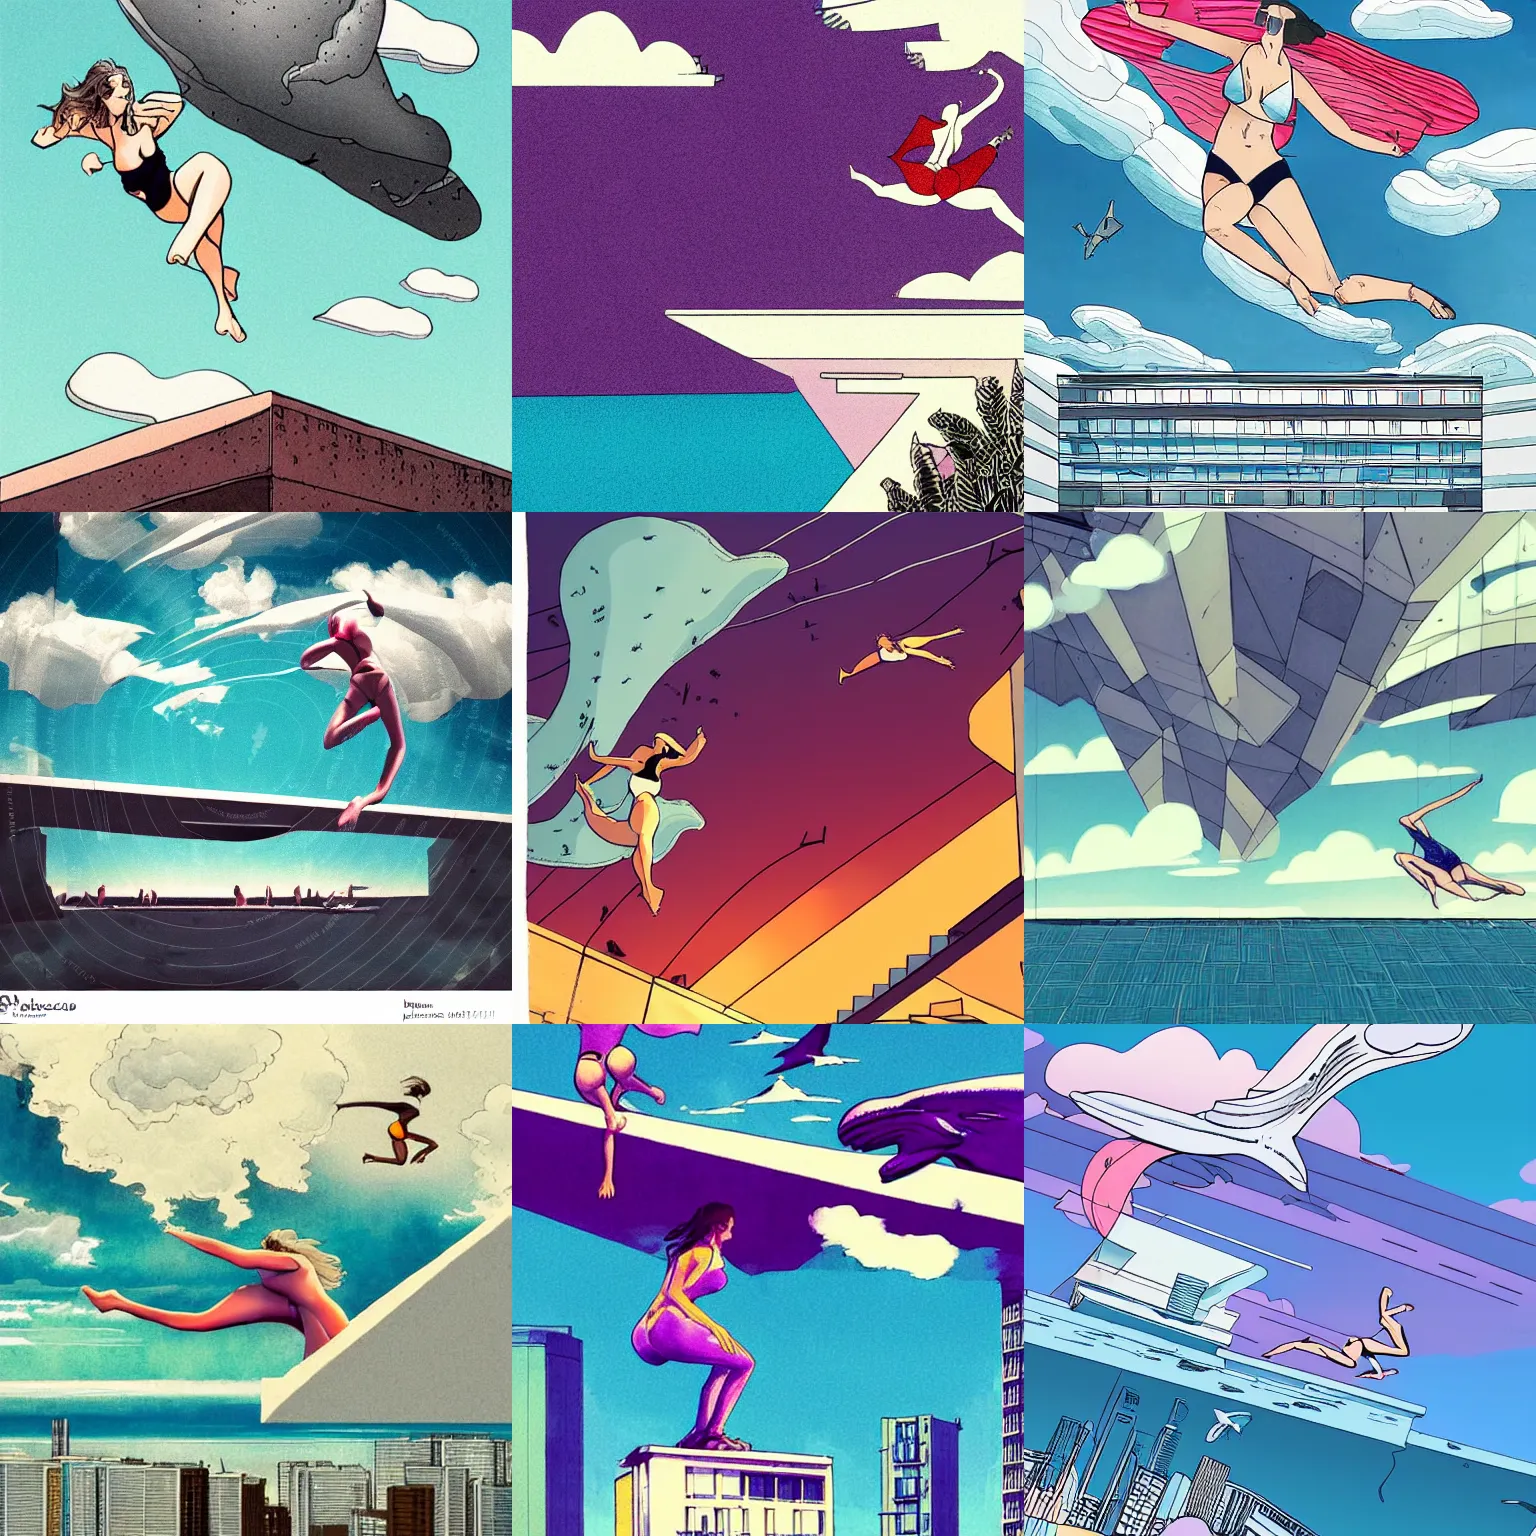 Prompt: urban brutalist flying white architecture with beautiful clouds, digital illustration, bright color palette, style by moebius, beautiful woman in bikini jumping into cantilevered pool, flying whales through colorful clouds